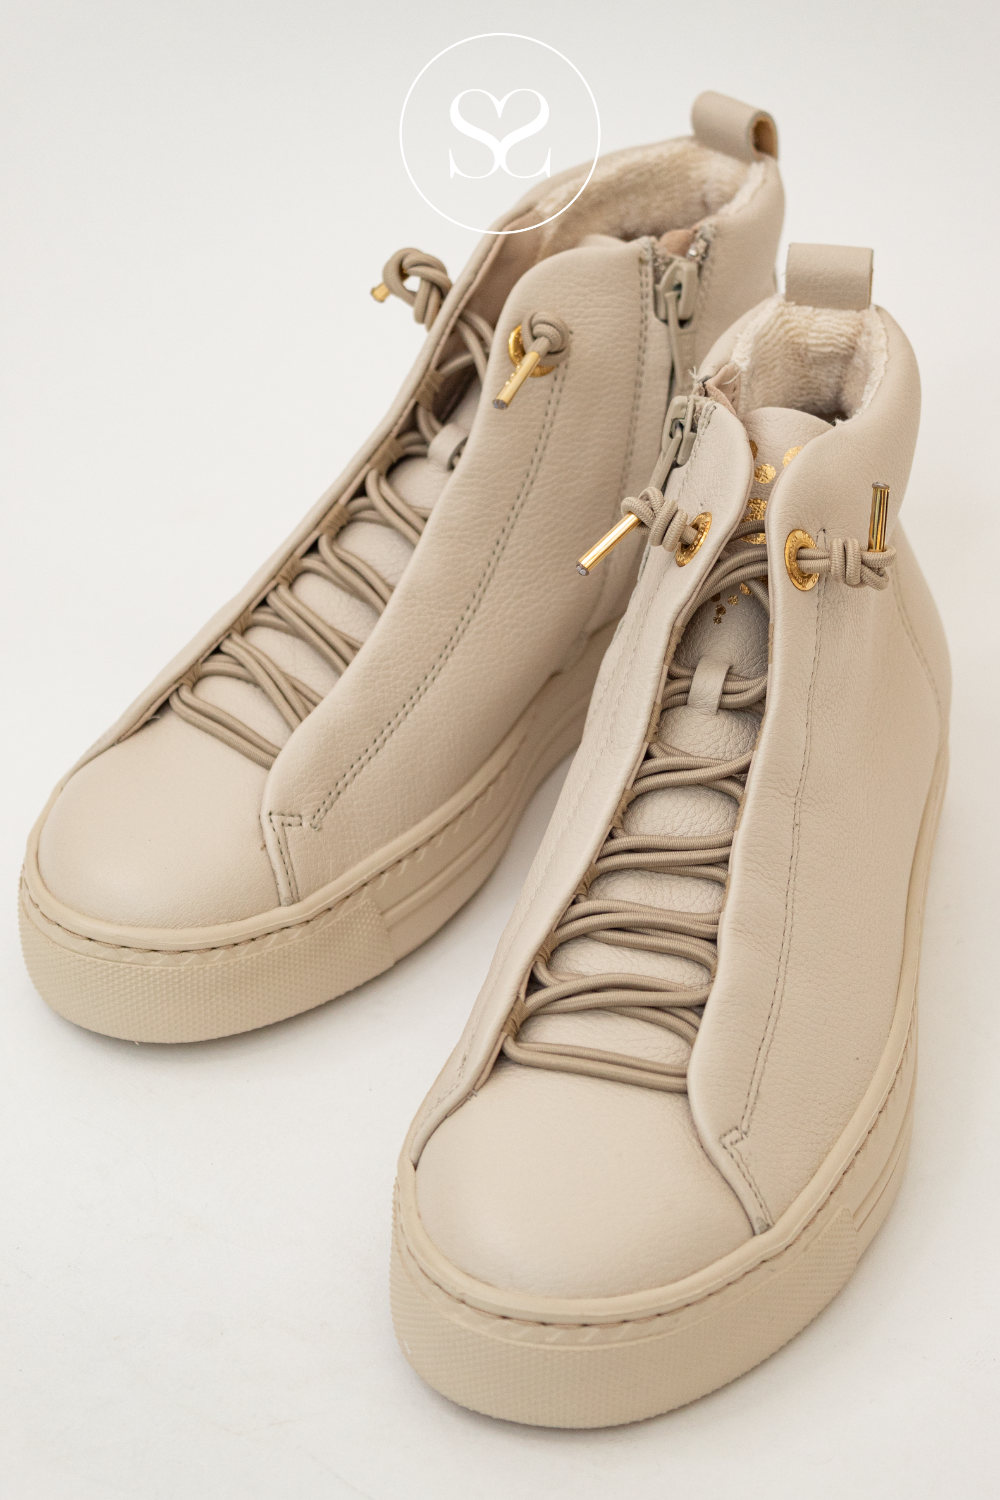 PAUL GREEN 5283 CREAM PULL ON HIGH TOP TRAINERS WITH ELASTICATED LACES AND GOLD DETAIL